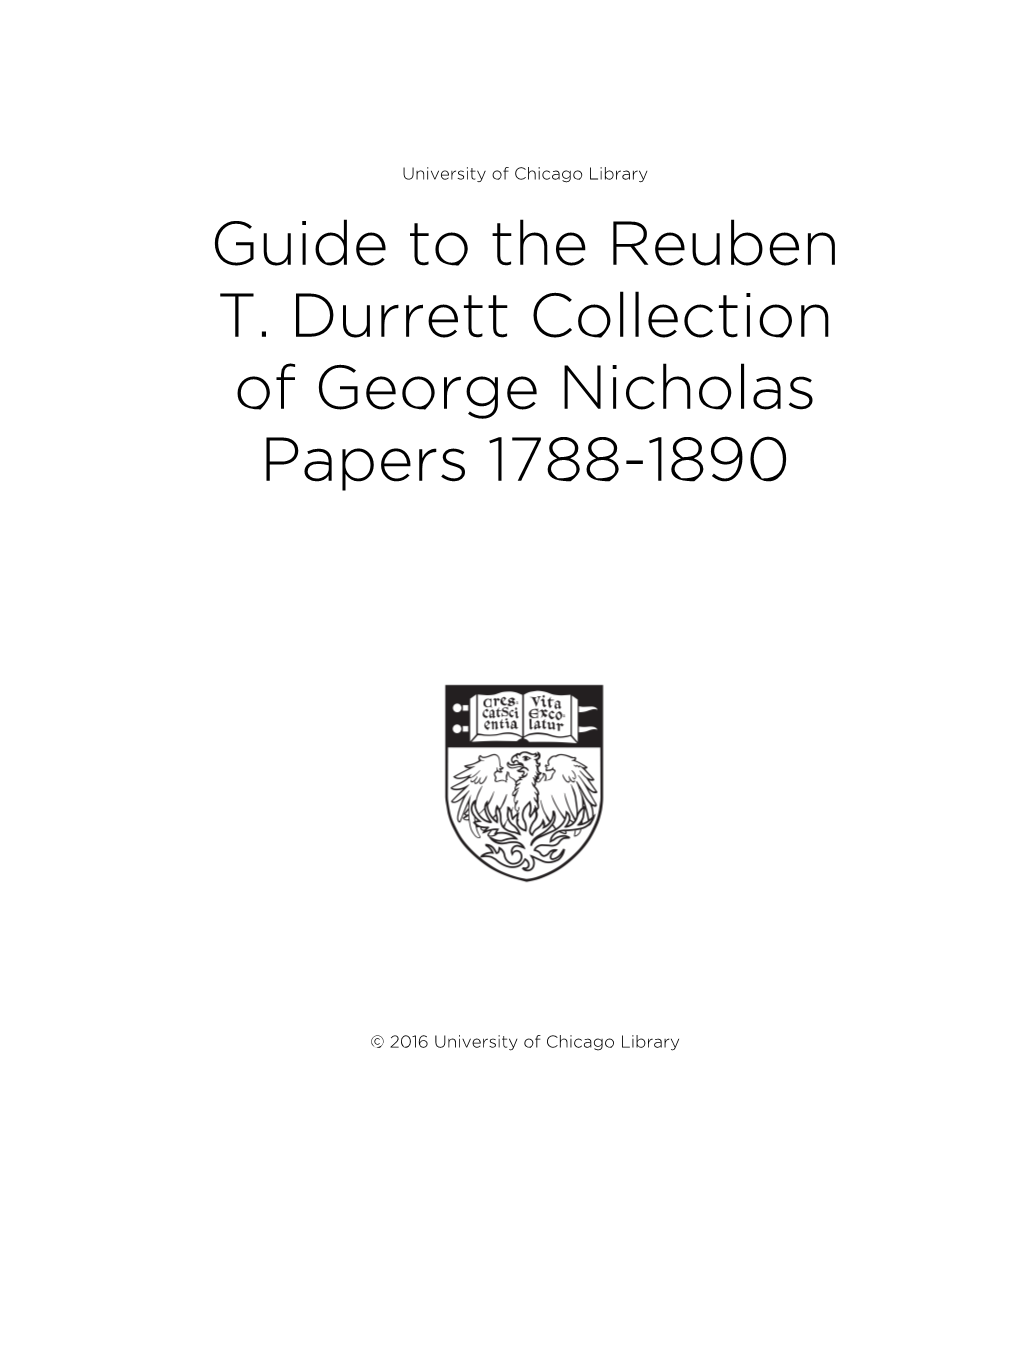 Guide to the Reuben T. Durrett Collection of George Nicholas Papers 1788-1890